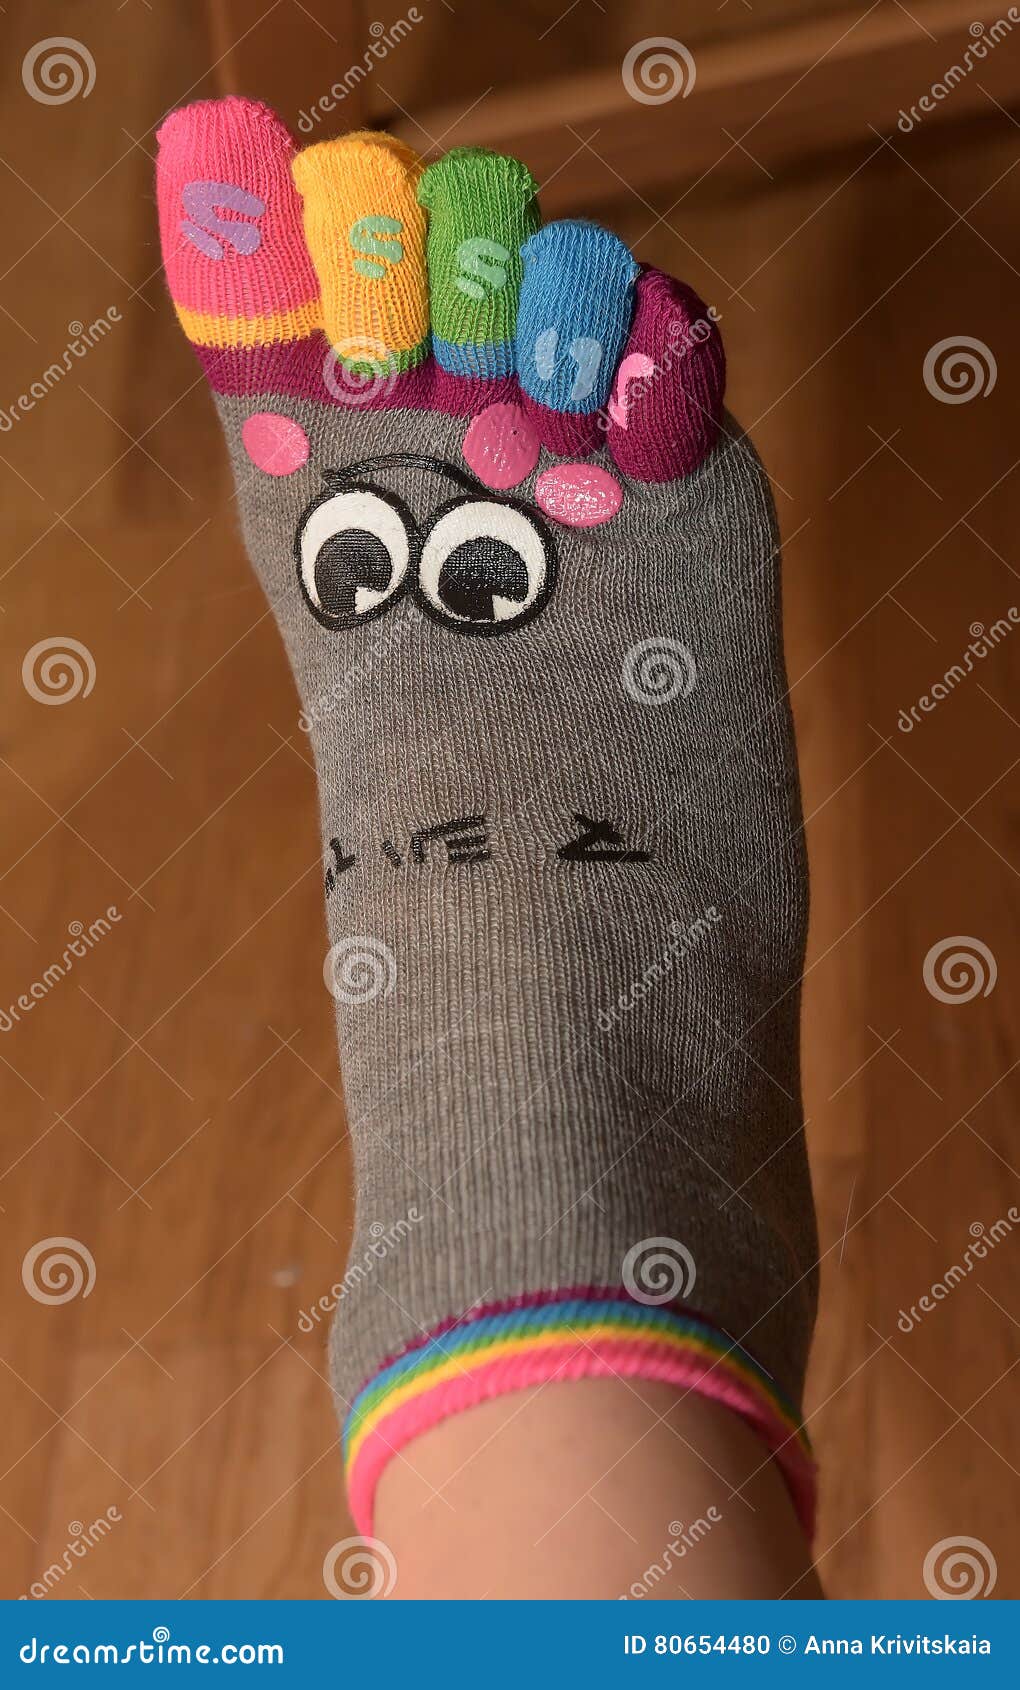 Socks with fingers stock photo. Image of color, clothing - 80654480